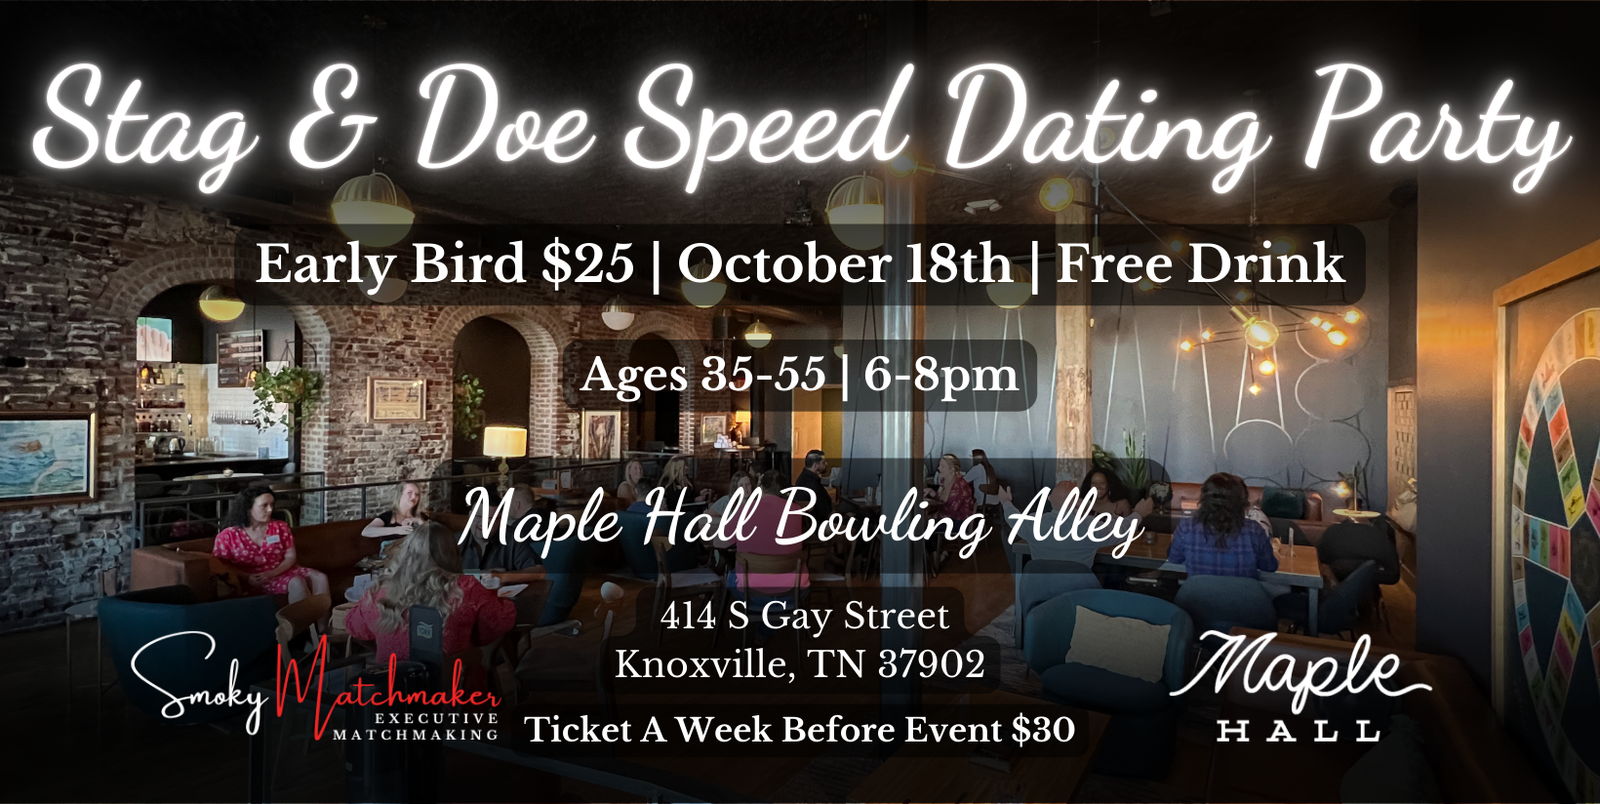 Speed Dating Party in October!